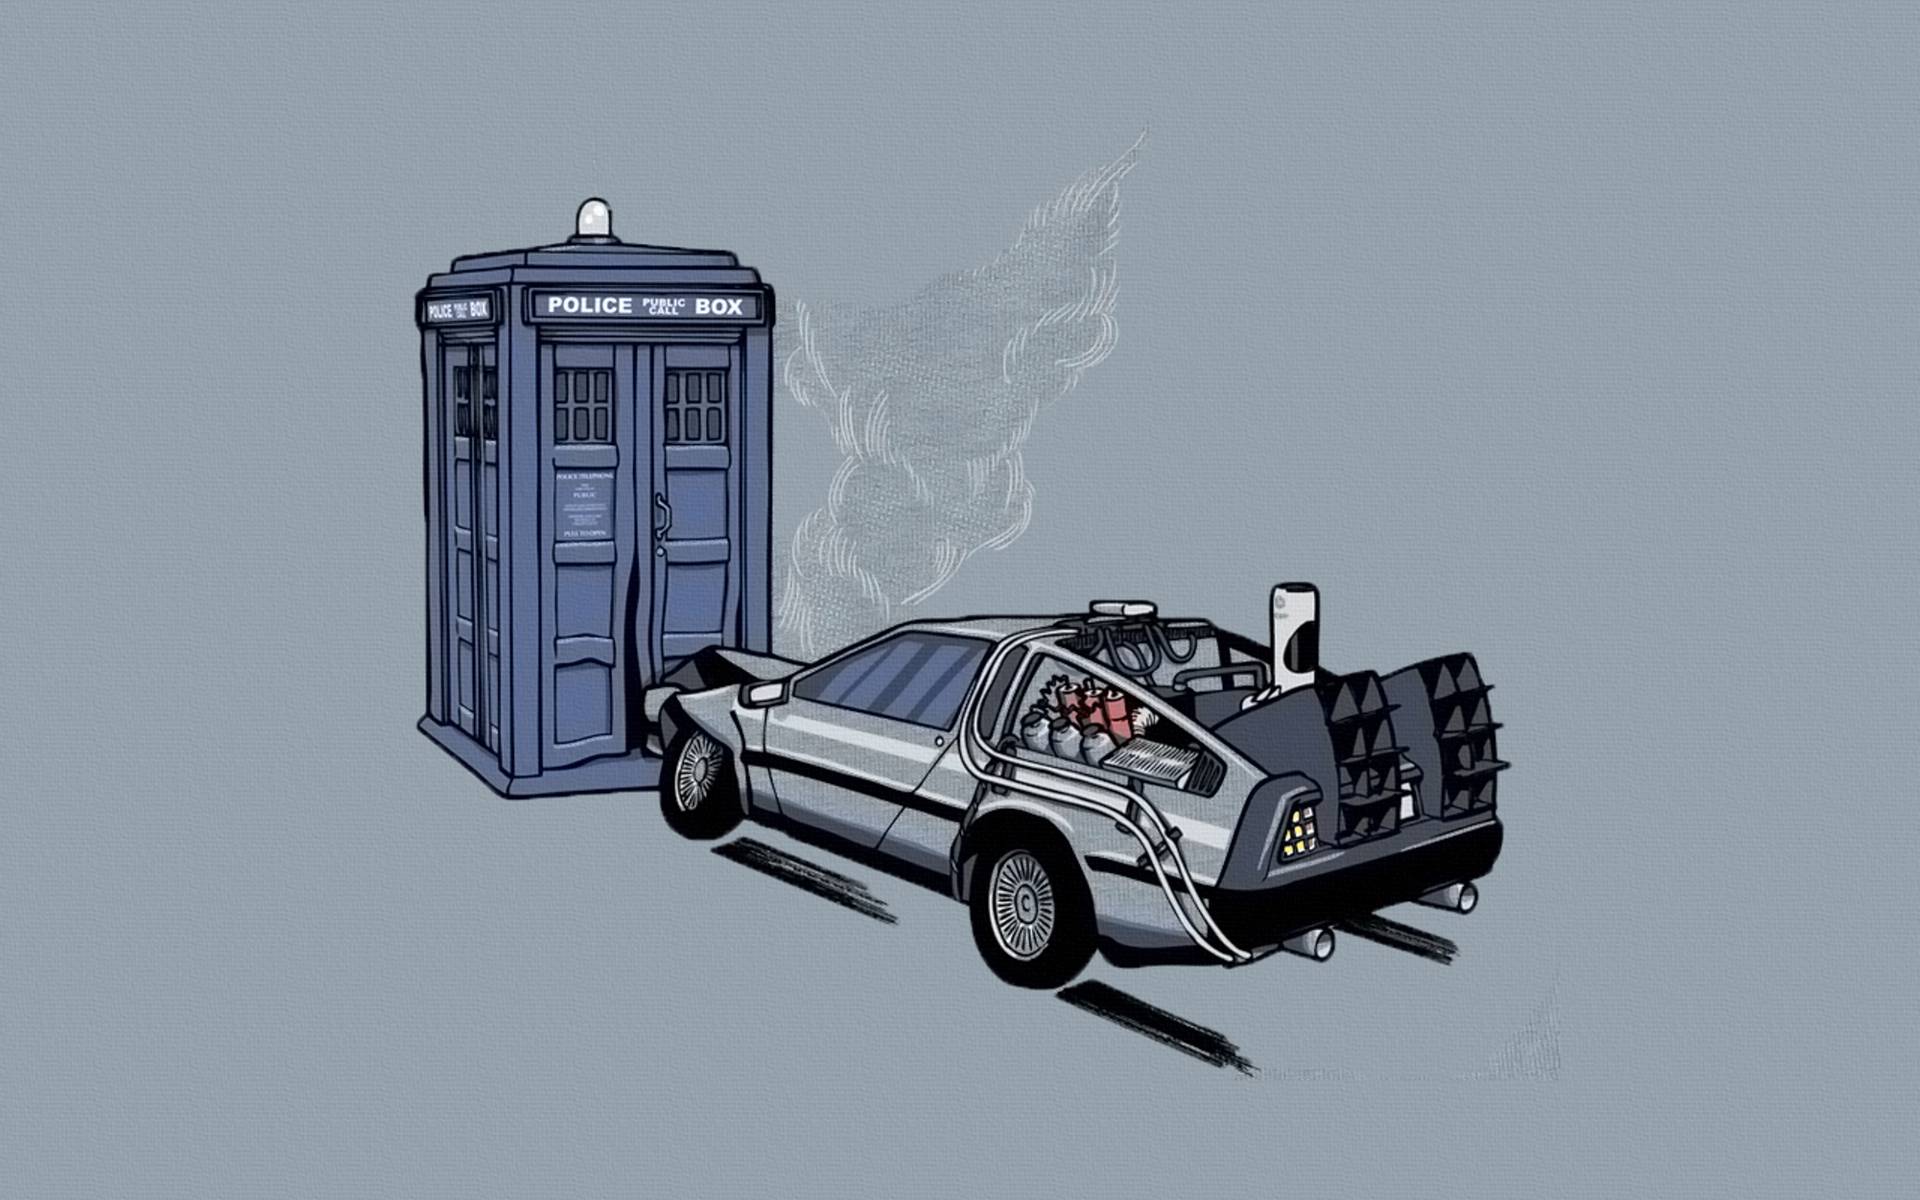 DeLorean parked next to a police box